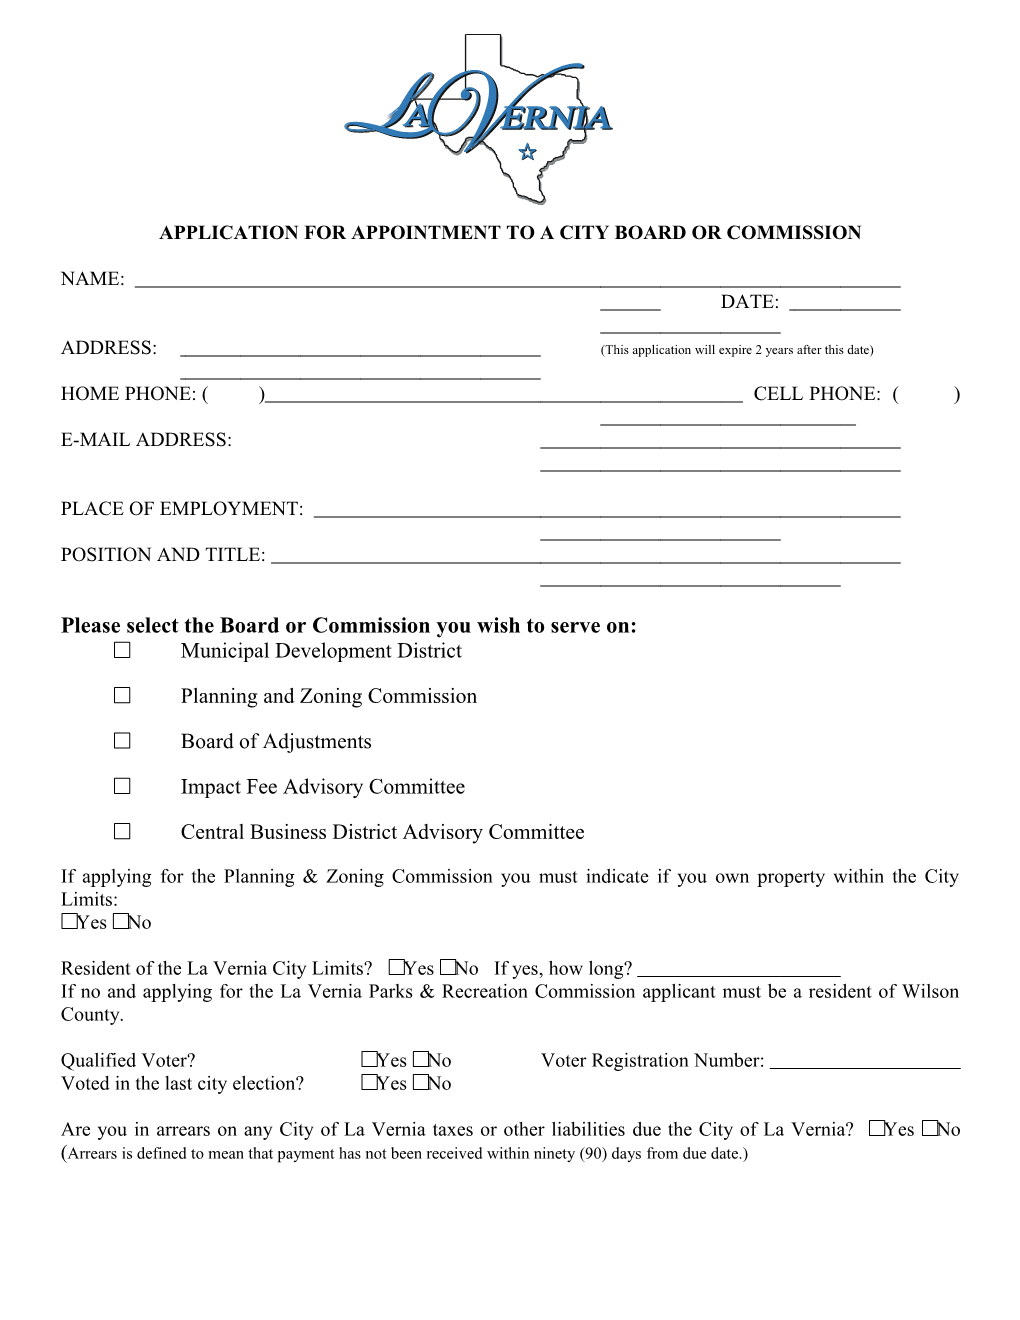 Application for Appointment to a City Board Or Commission